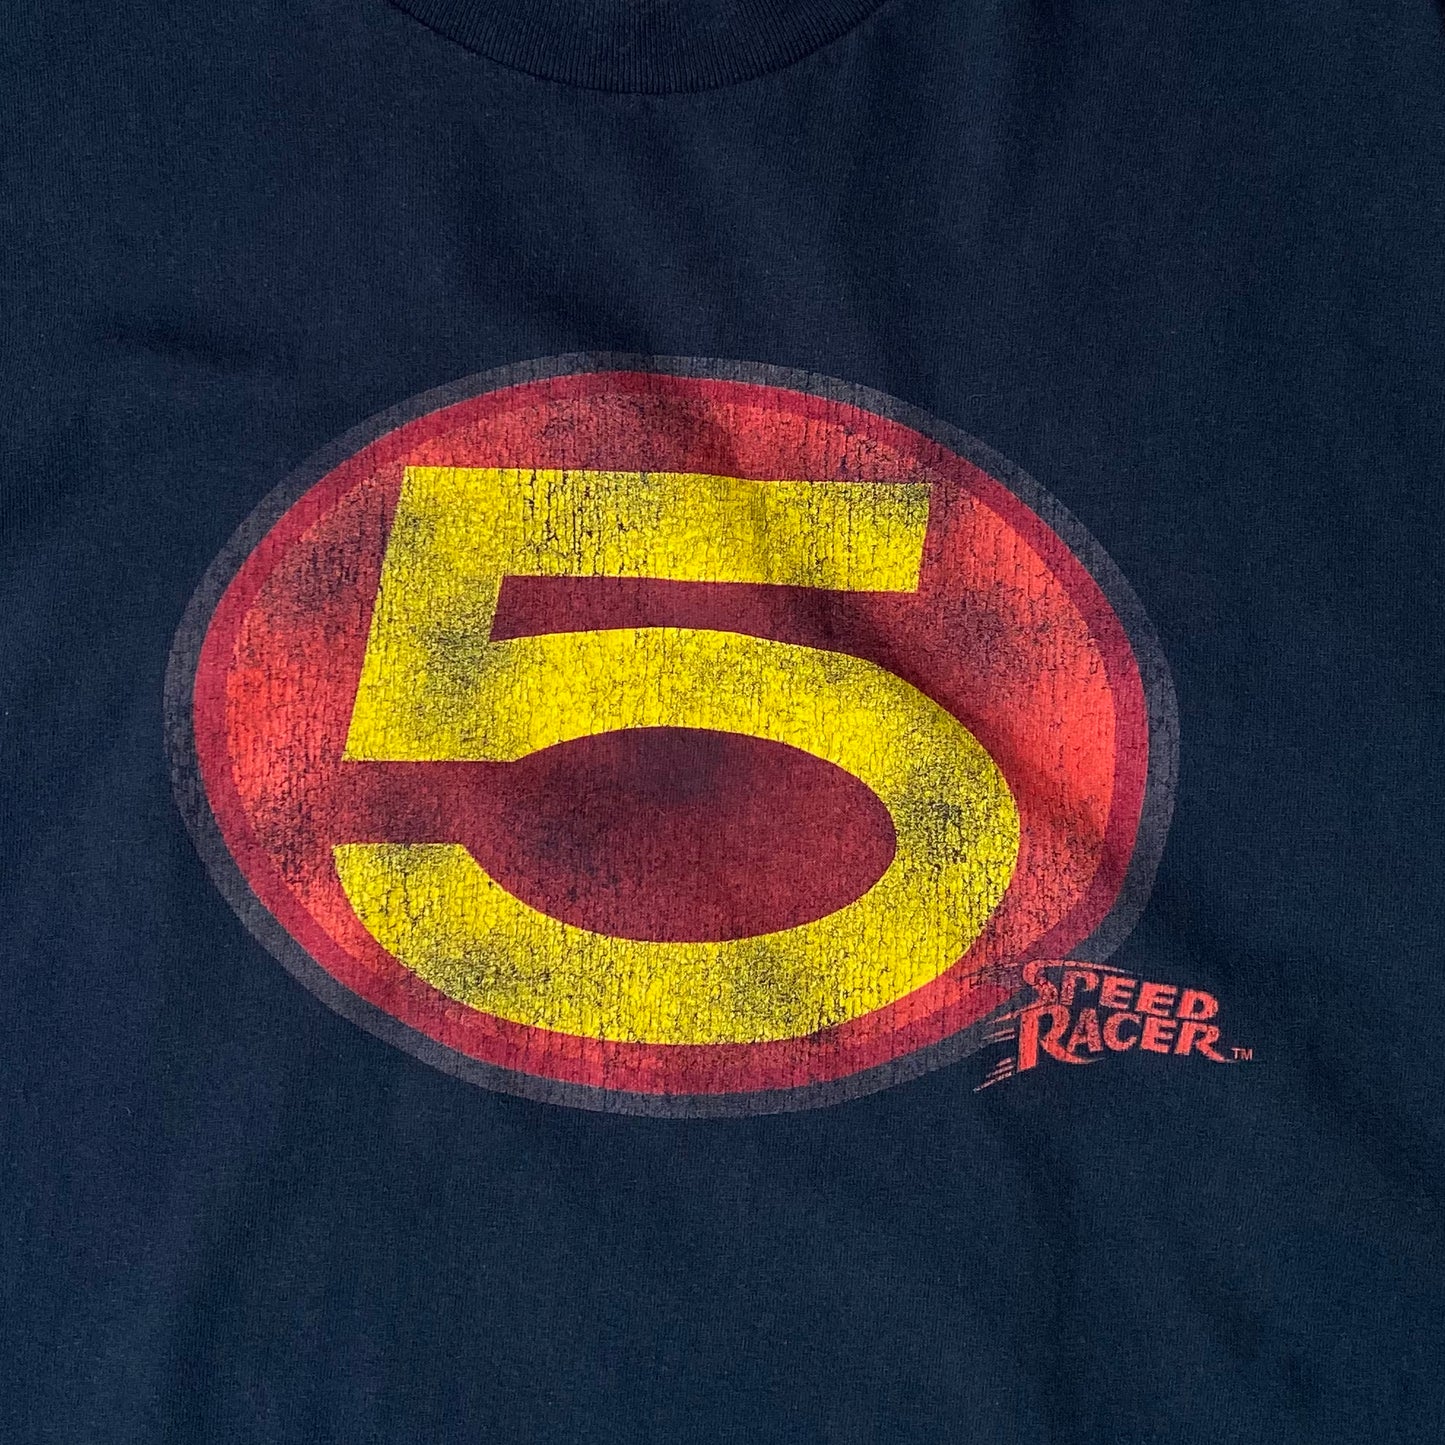 00's SPEED RACER "MACH 5" NUMBERING T-SHIRT